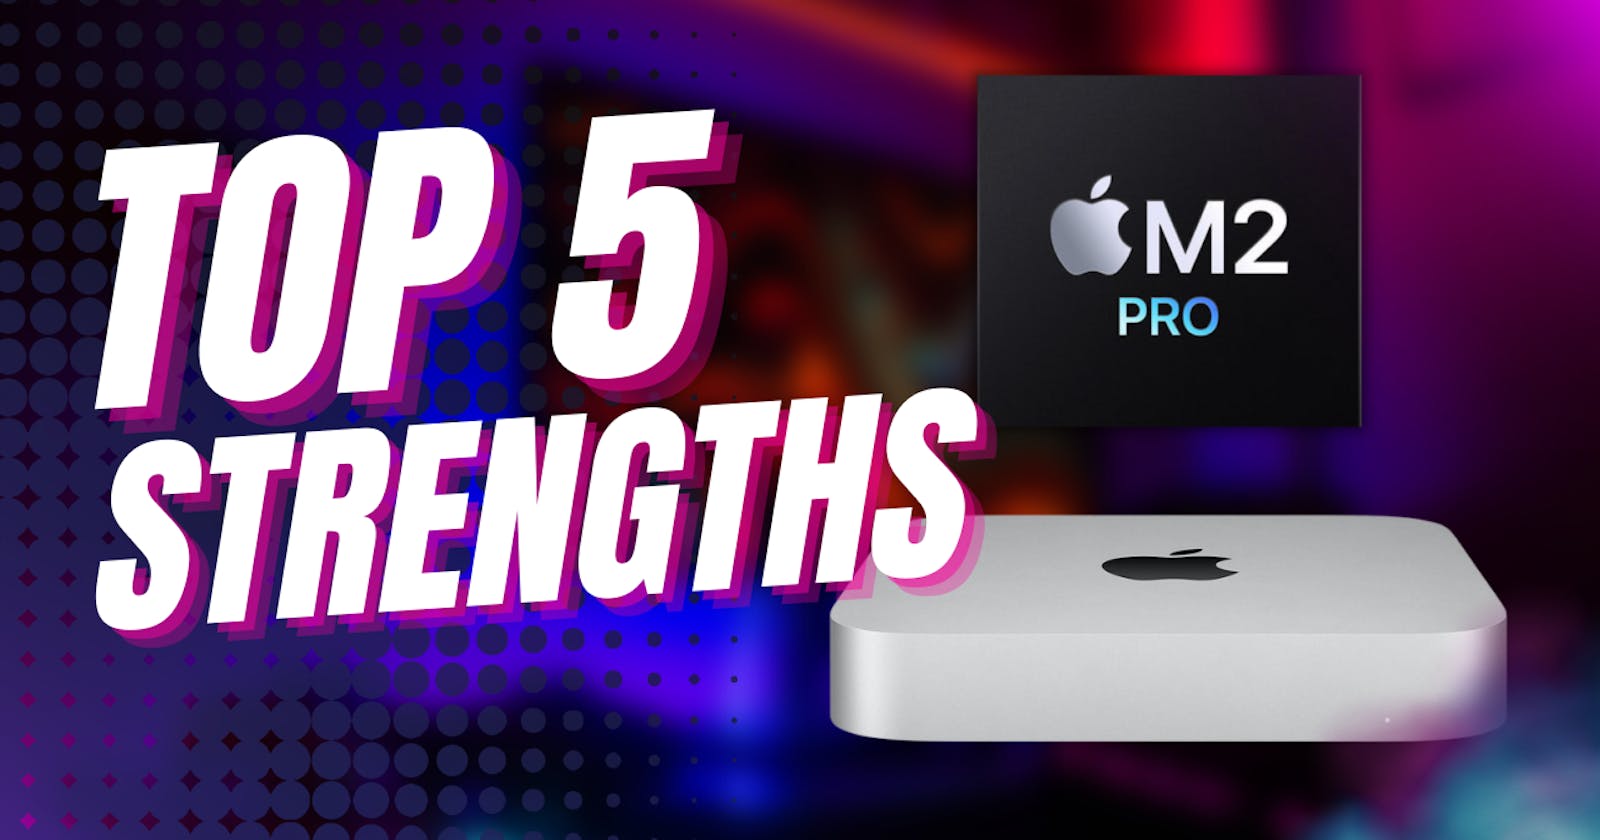 TOP 5 reasons why the Mac Mini M2 Pro is a BEAST: My opinion after 40 days